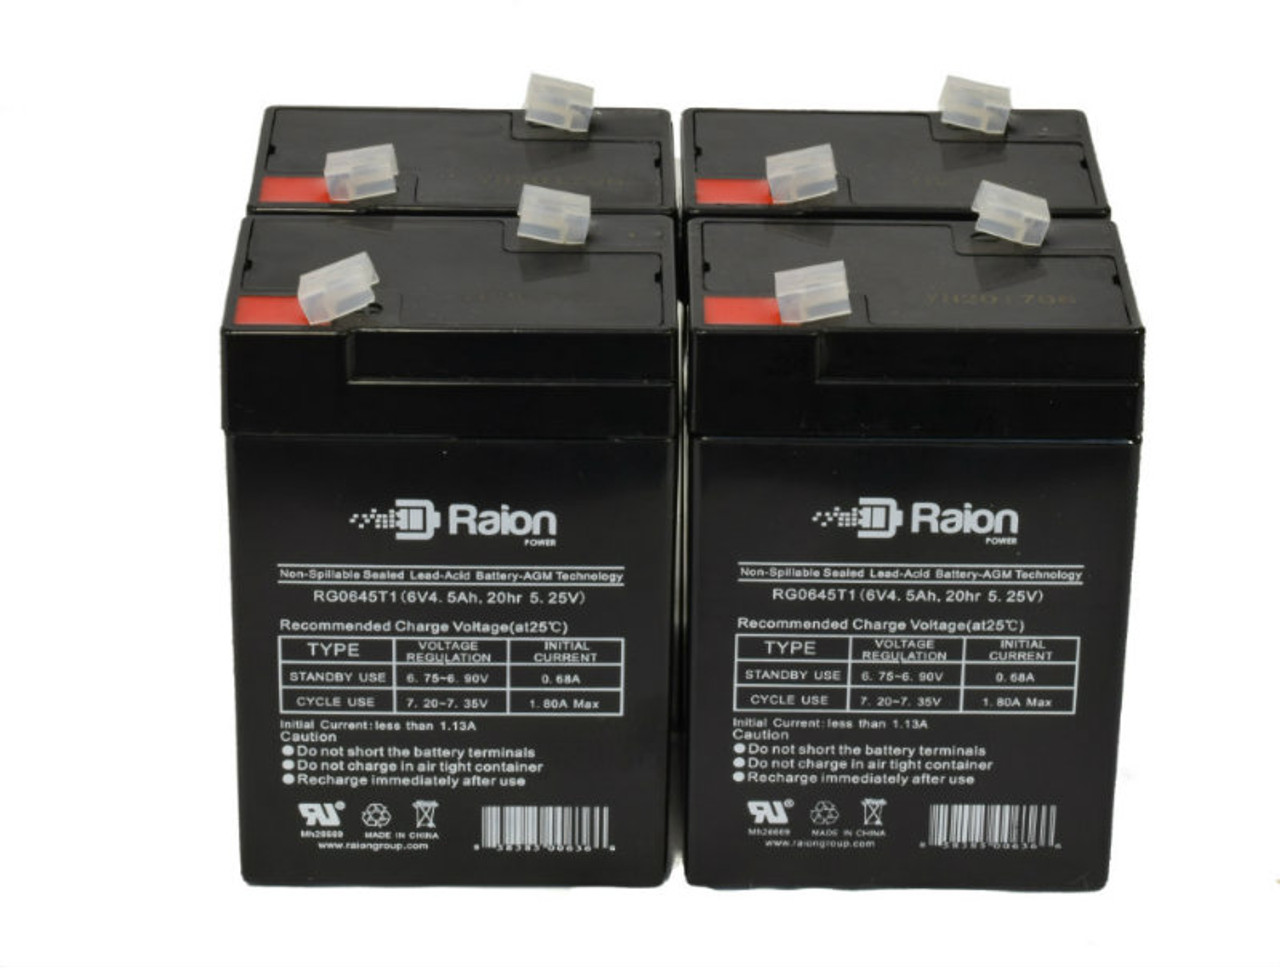 Raion Power 6V 4.5Ah Replacement Emergency Light Battery for Interstate SEC0905 - 4 Pack